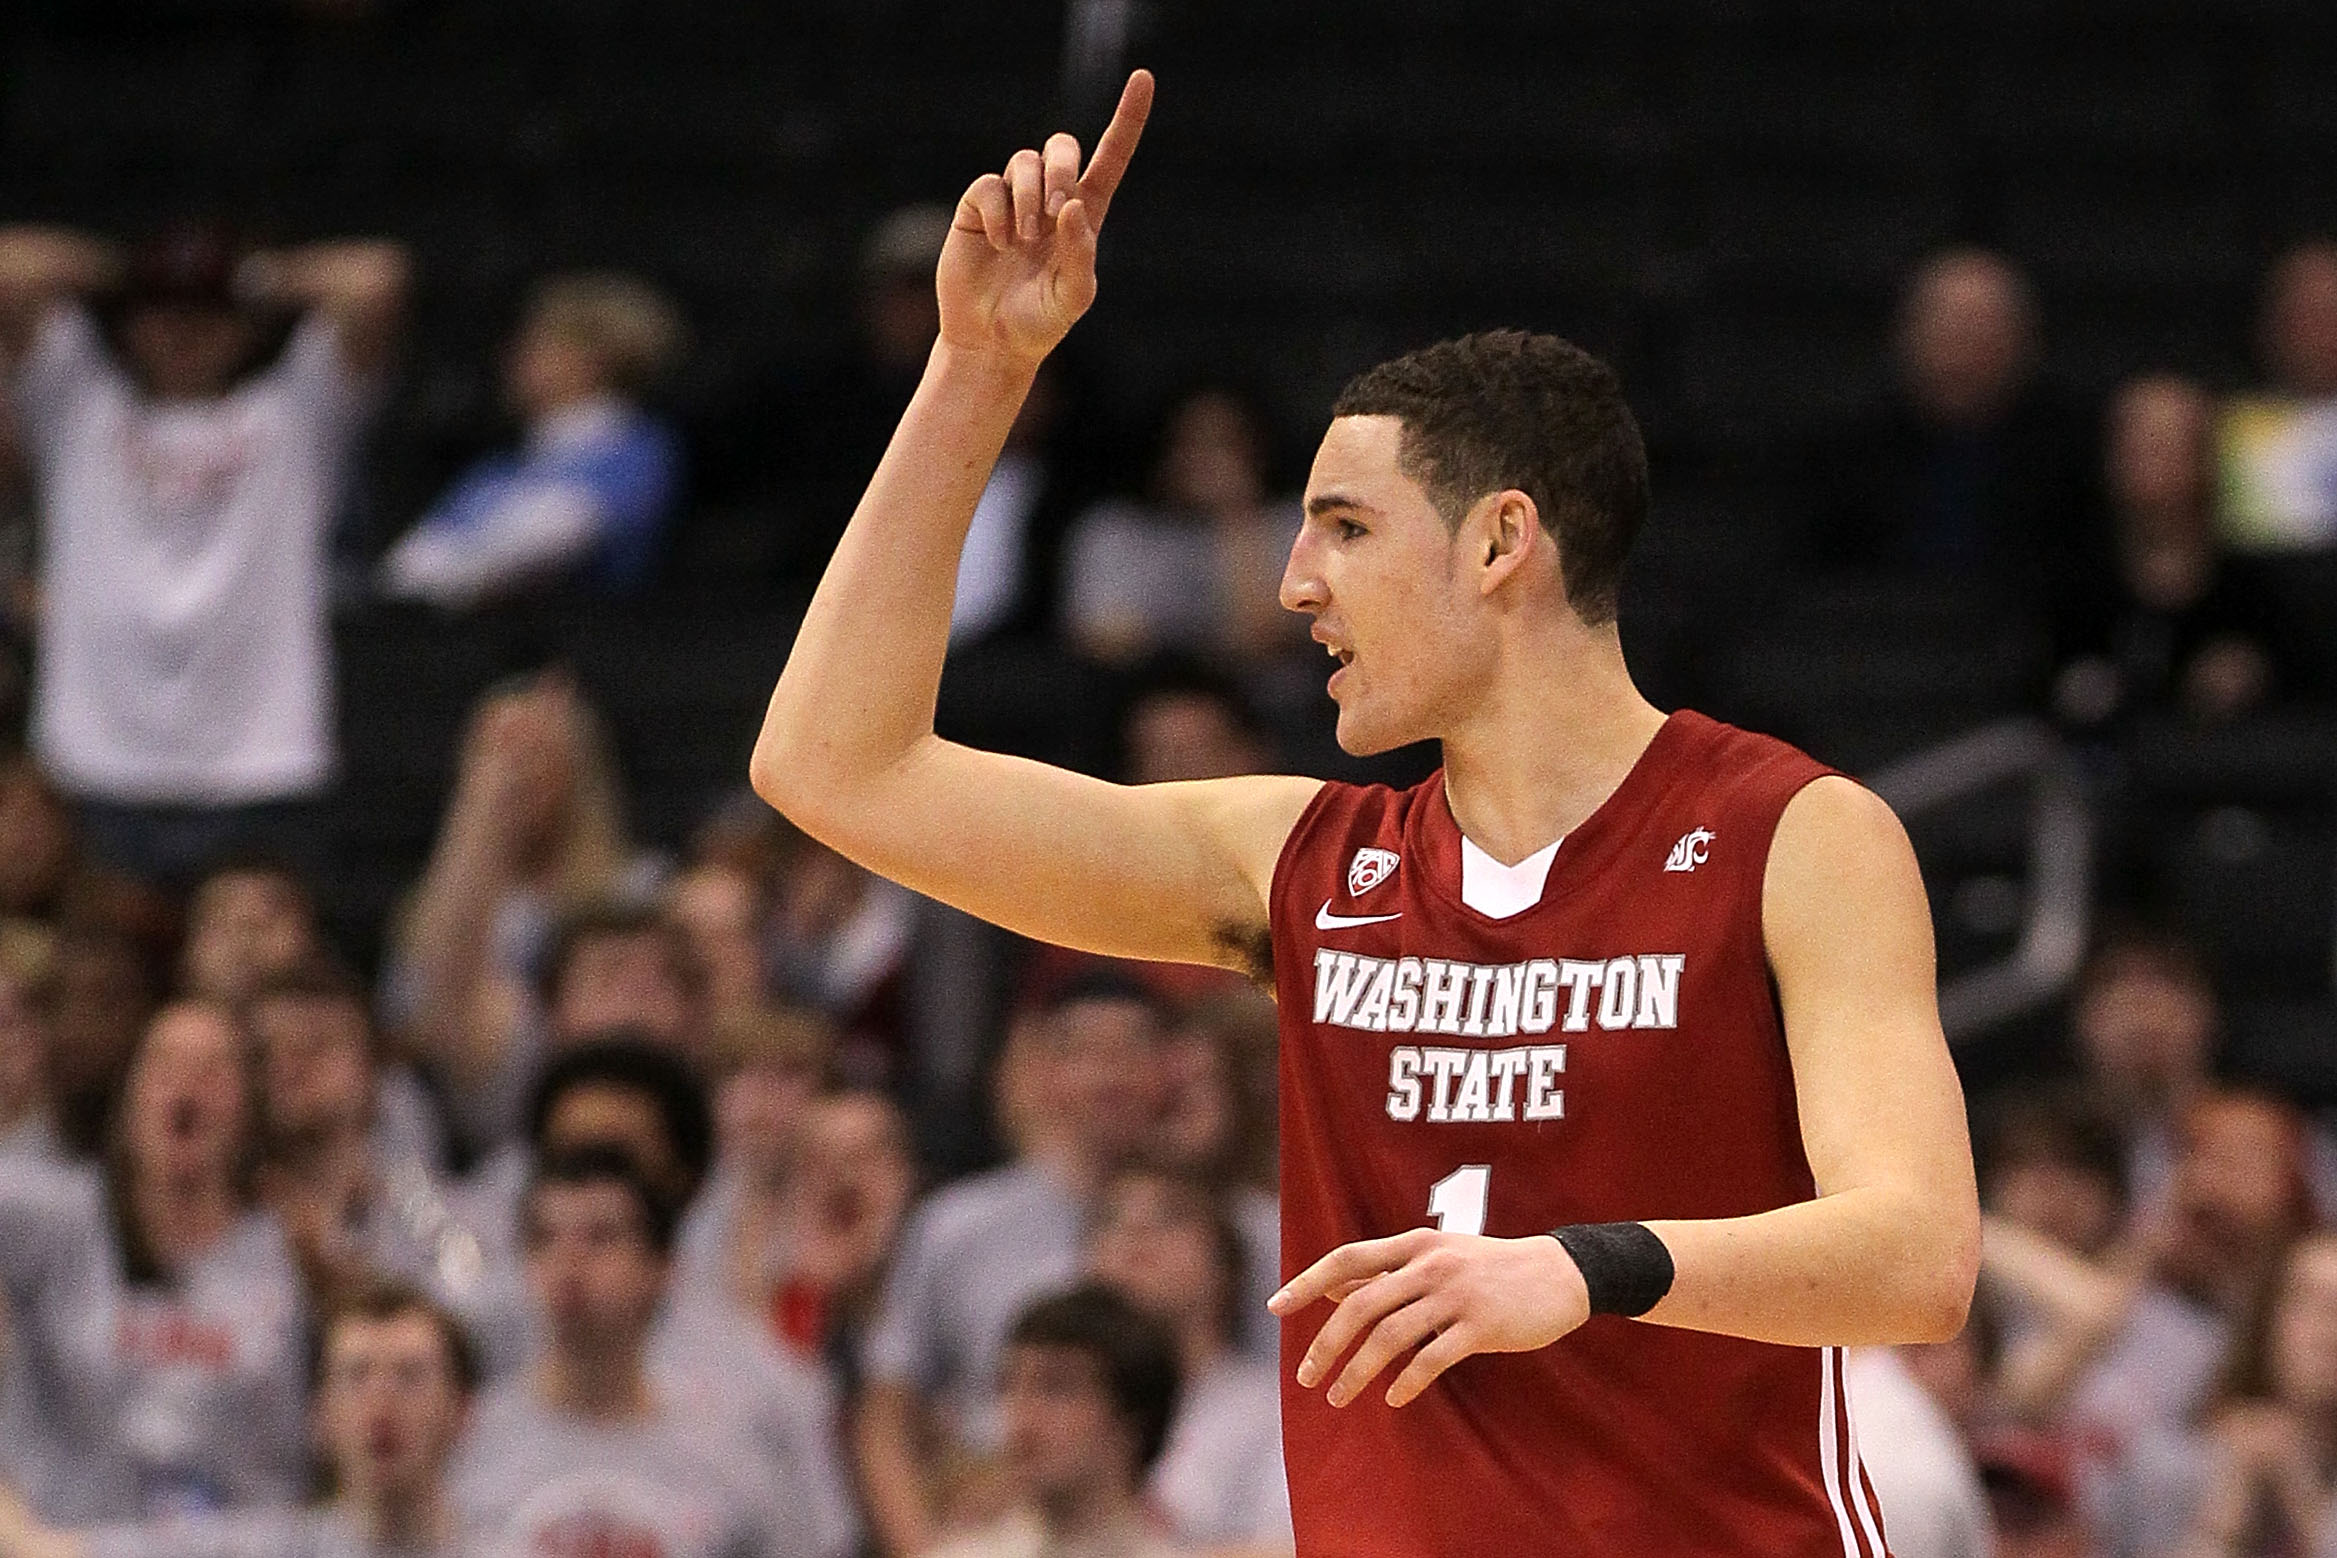 LOS ANGELES, CA - MARCH 10:  Klay Thompson #1 of the Washington State Cougars reacts after making a shot in the second half while taking on the Washington Huskies in the quarterfinals of the 2011 Pacific Life Pac-10 Men's Basketball Tournament at Staples 